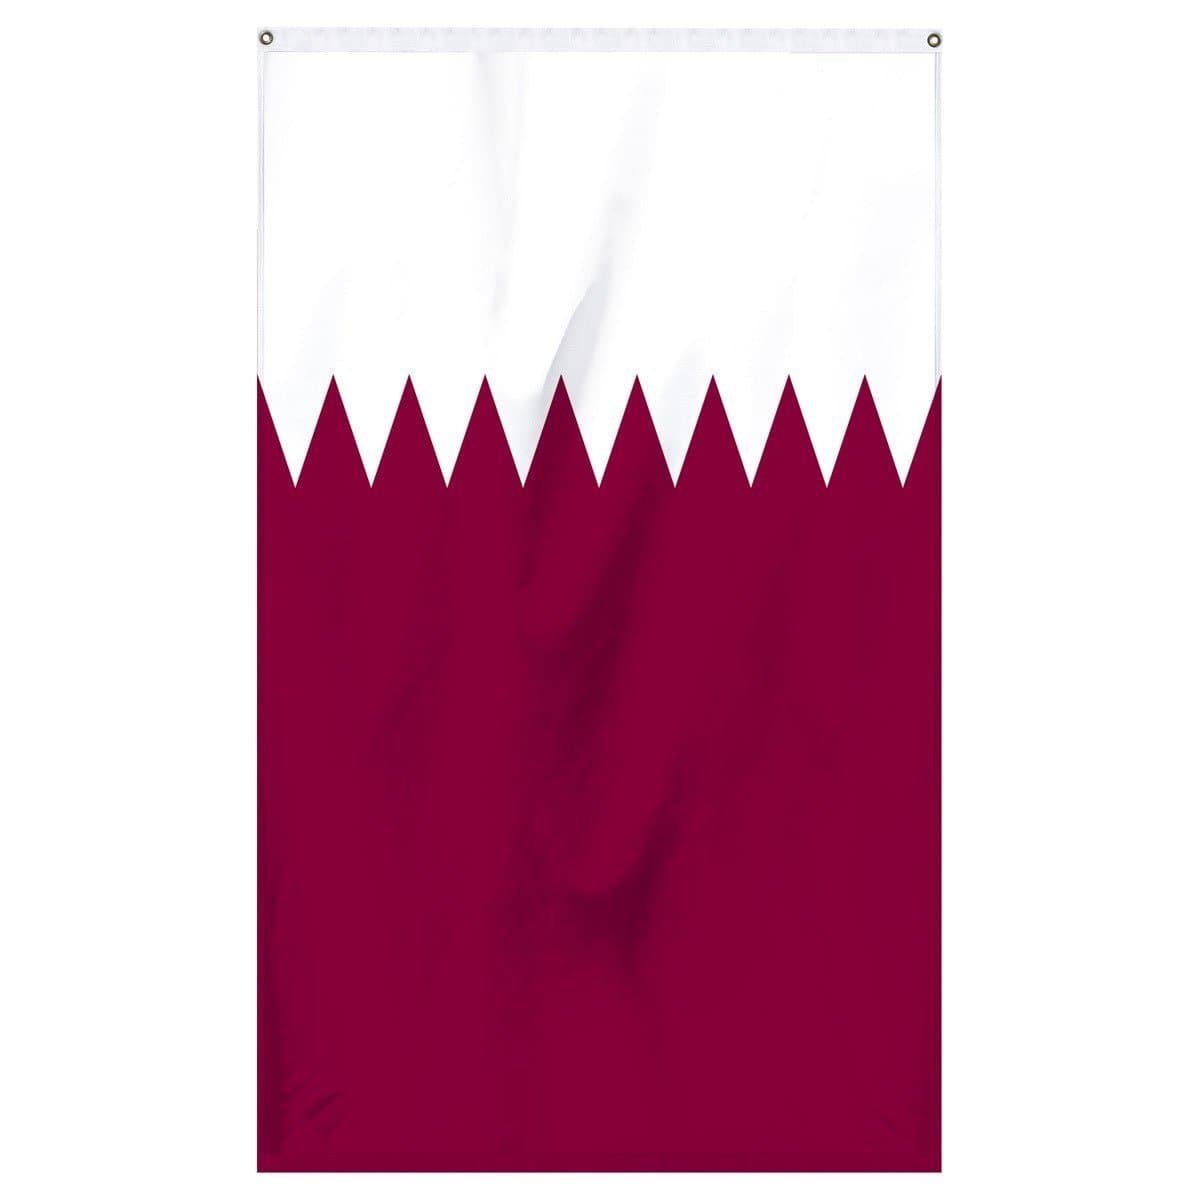 Qatar national flag for sale to buy online now from an American company